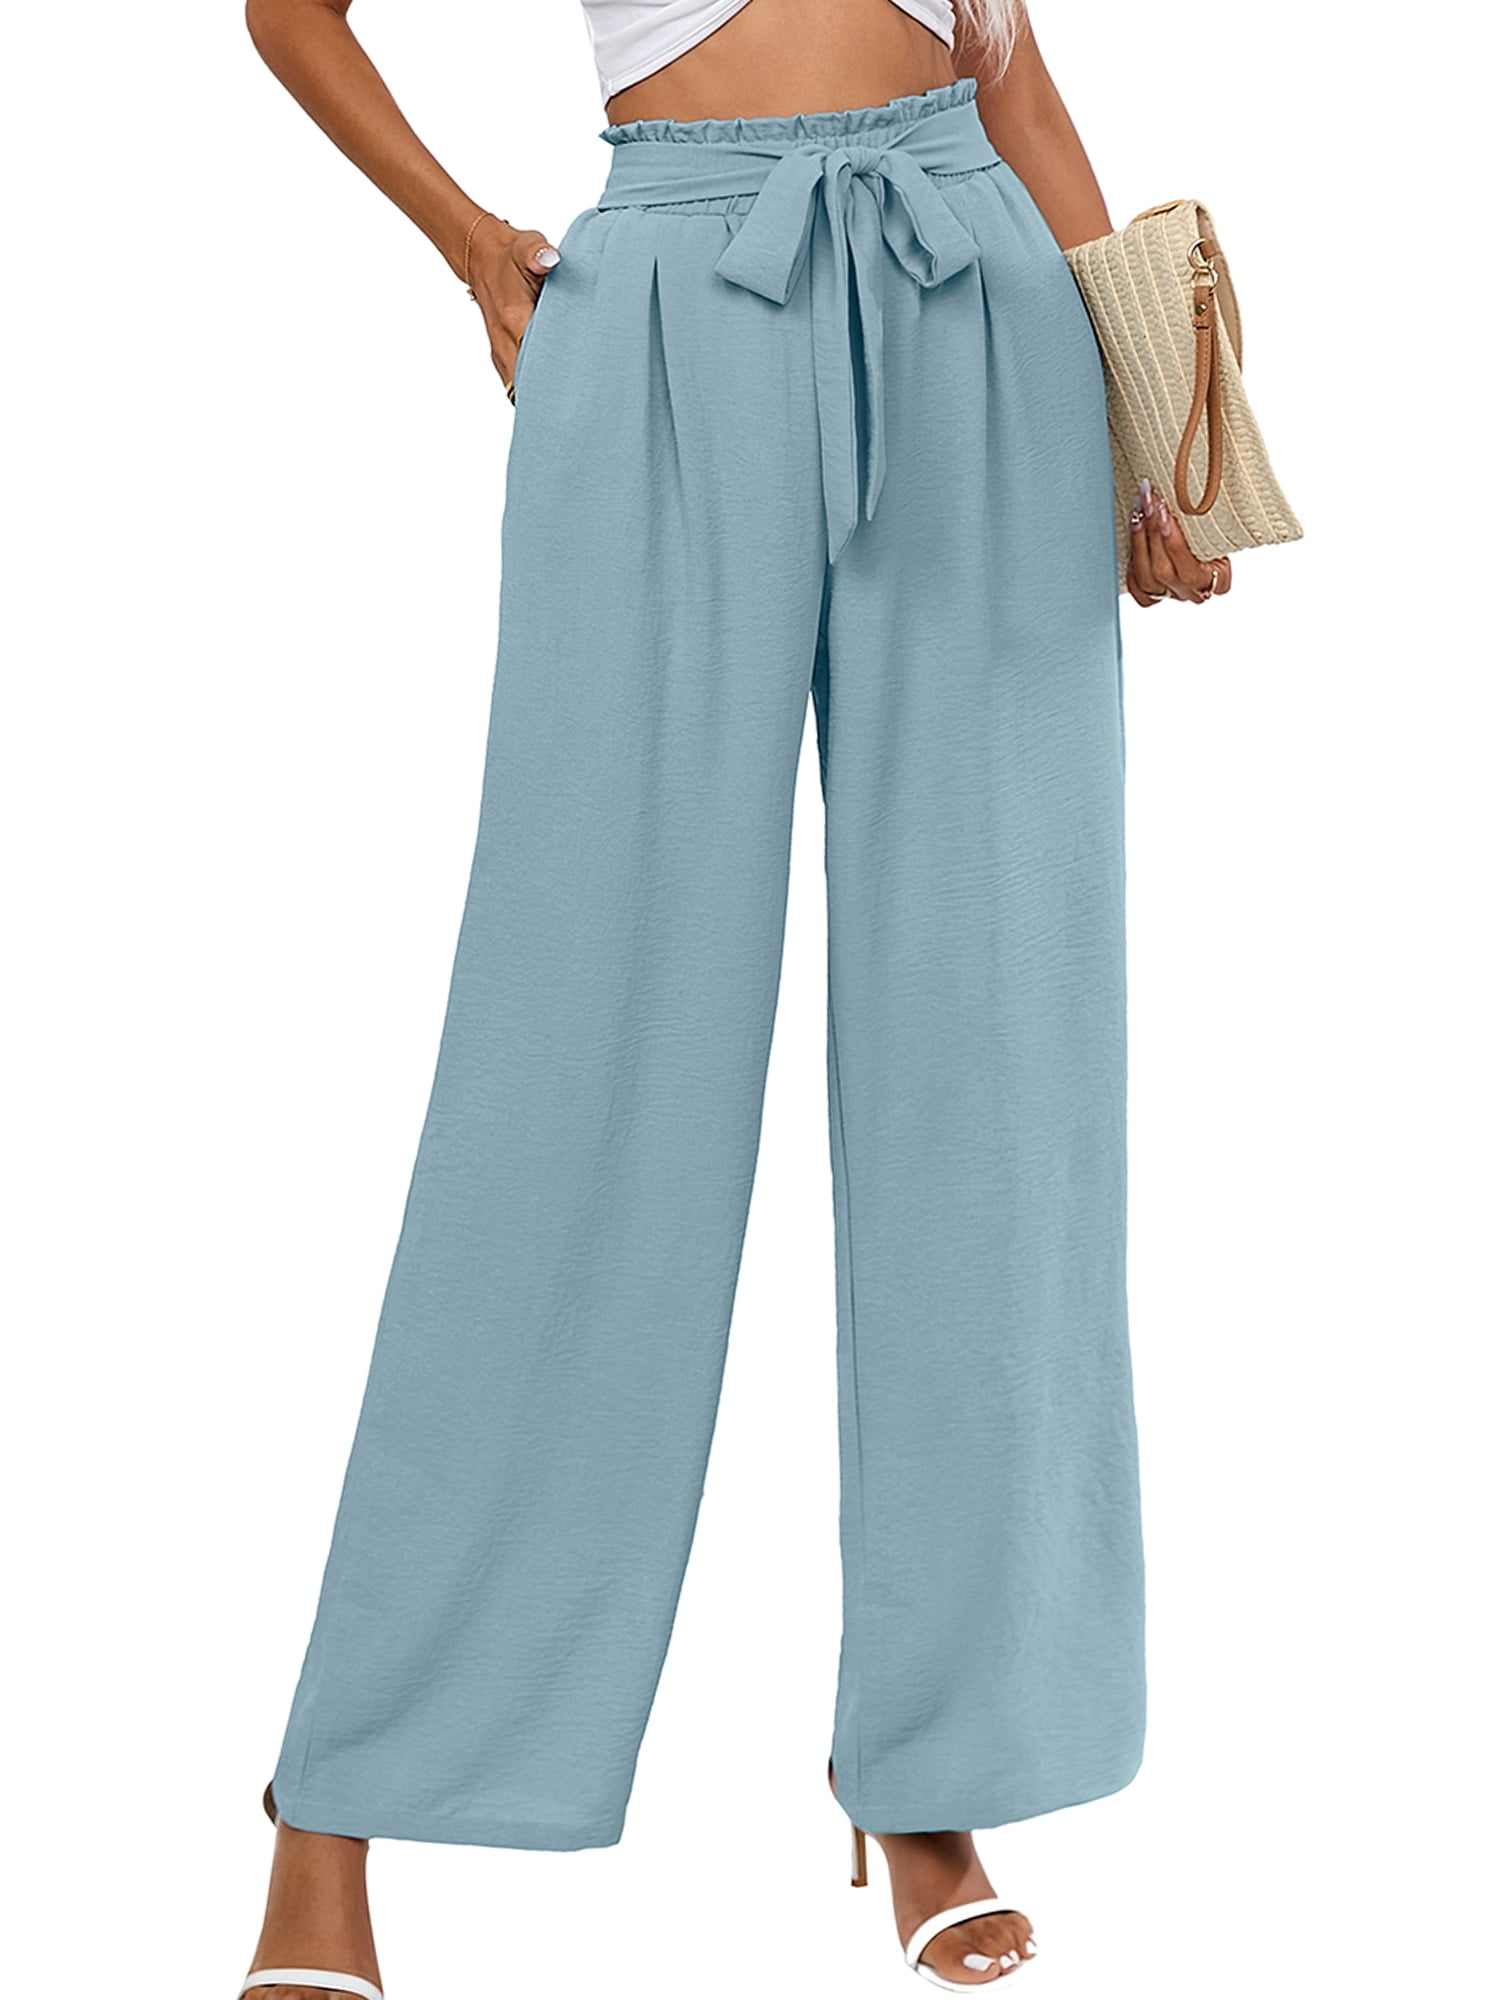 Chiclily Women's Wide Leg Lounge Pants with Pockets Lightweight High  Waisted Adjustable Tie Knot Loose Trousers, US Size Medium in Blue Gray